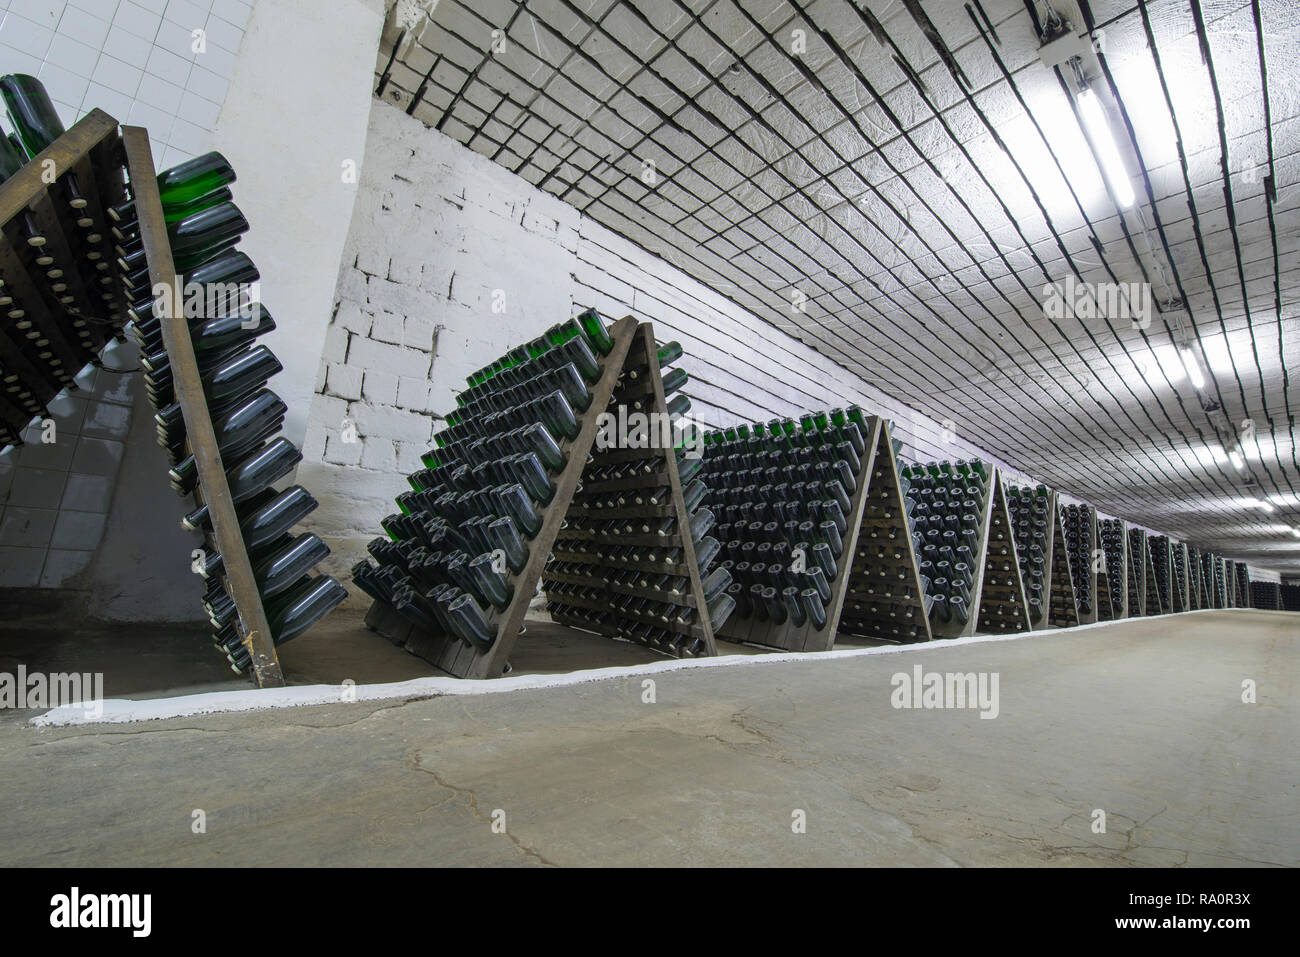 Storage hall of white sparkling wine bottles in the cellars of winery, sparkling wine fermenting on stands Stock Photo